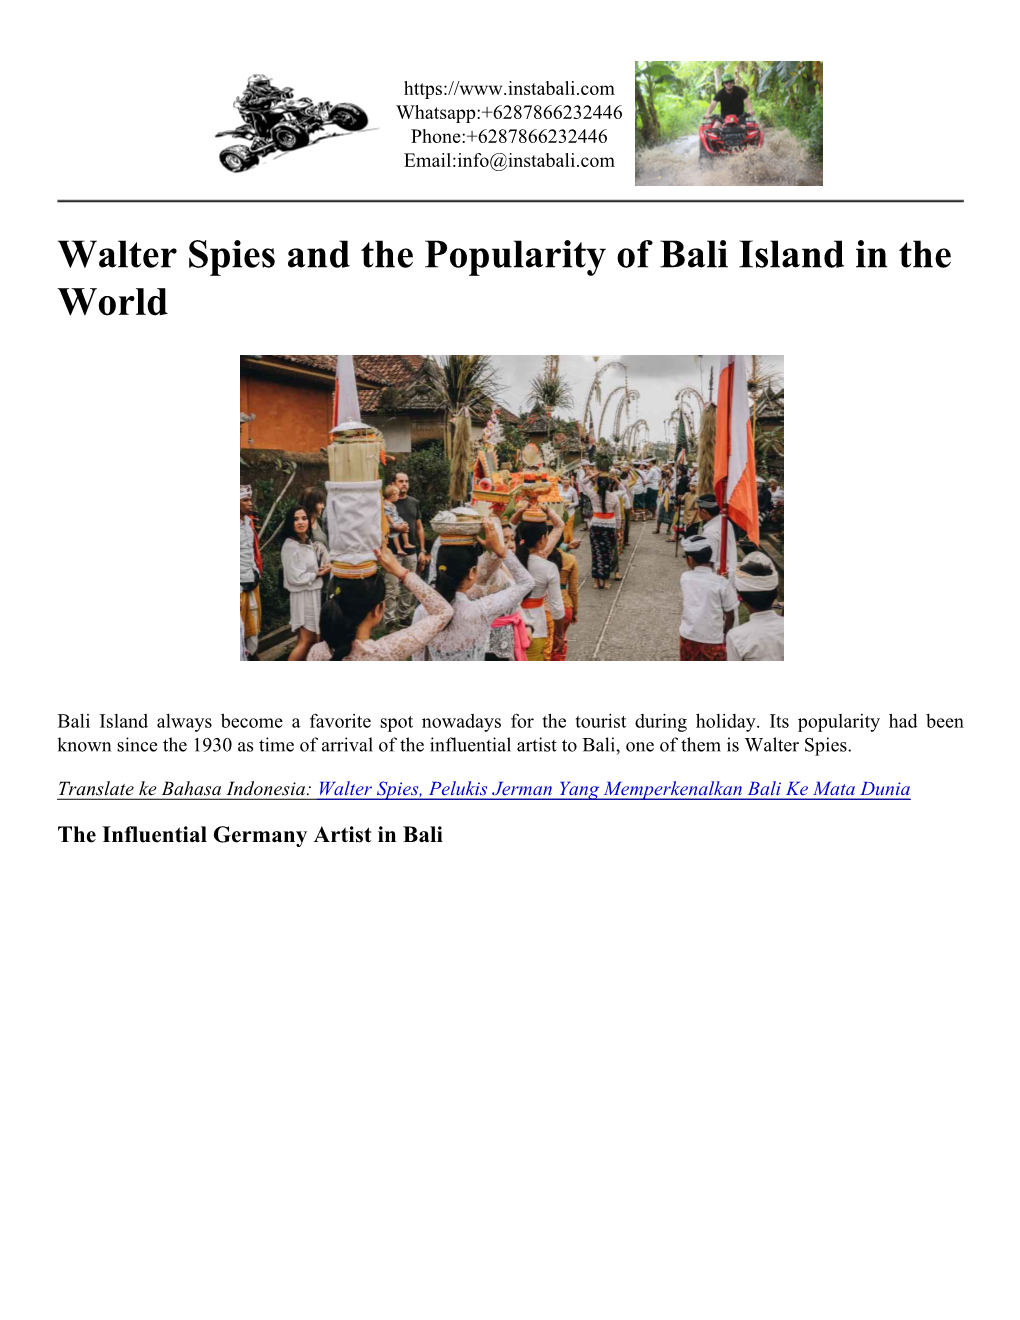 Walter Spies and the Popularity of Bali Island in the World